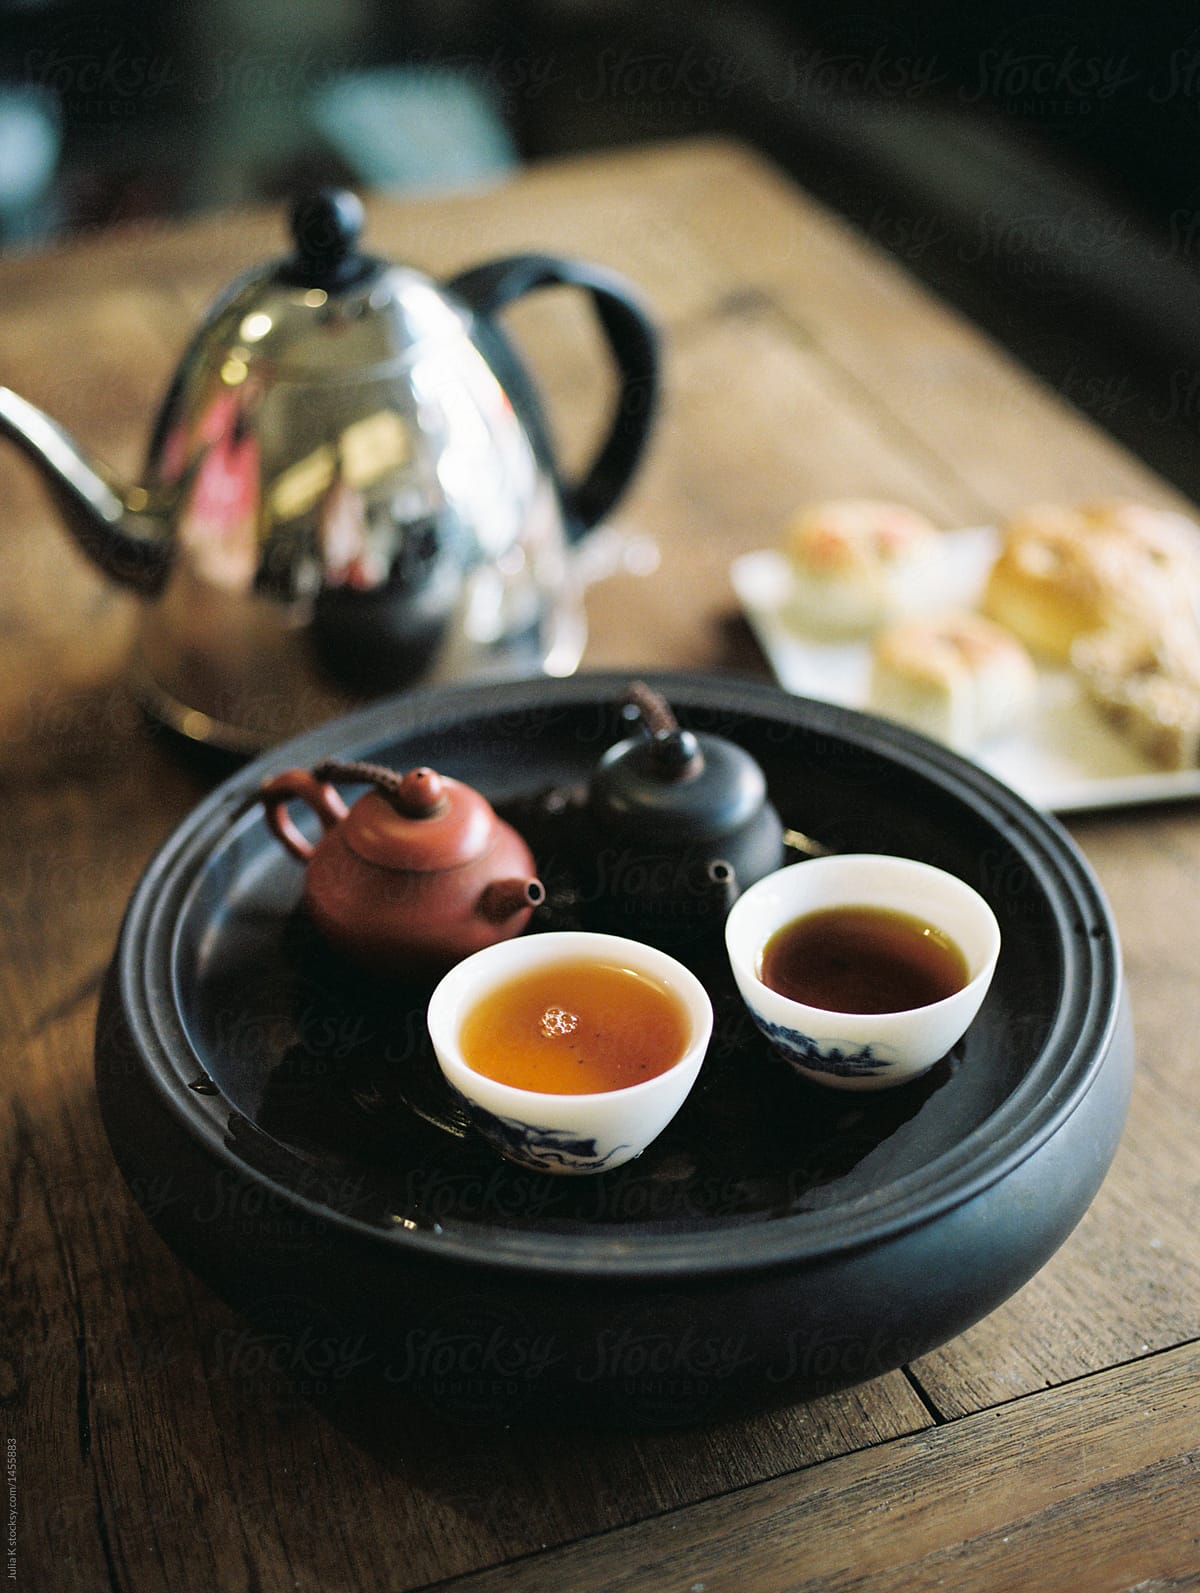 traditional chinese tea sets